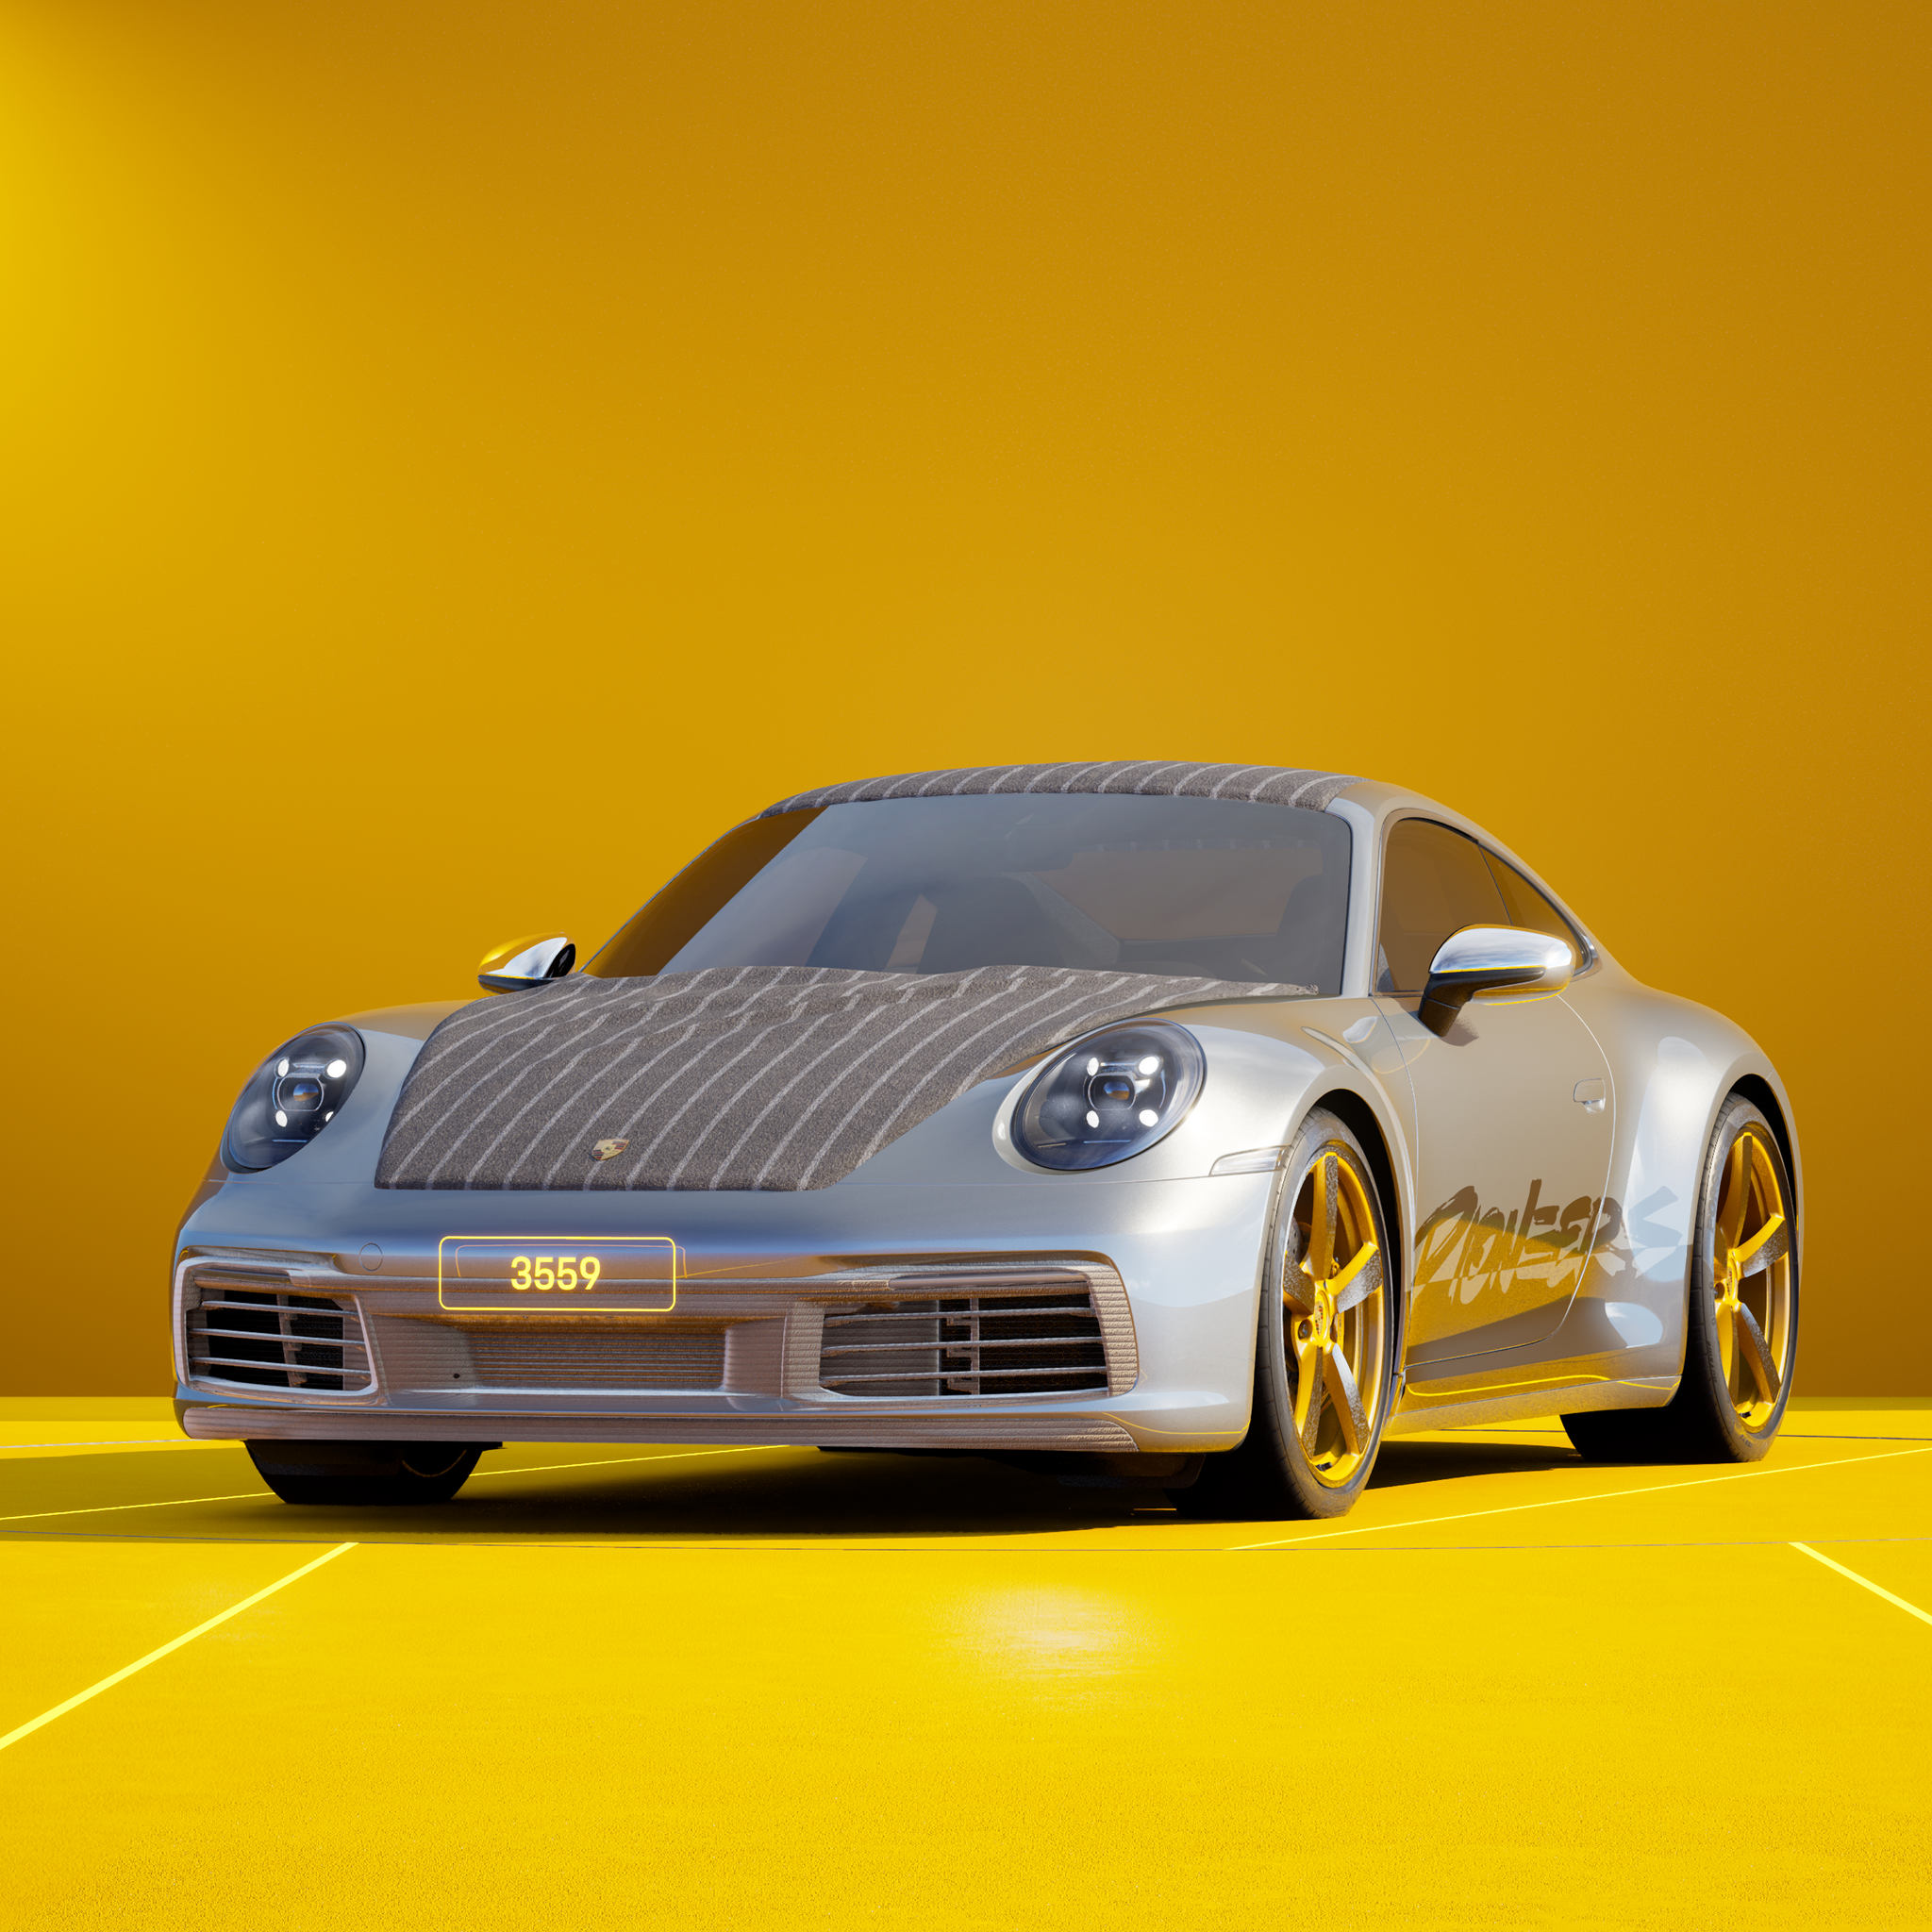 The PORSCHΞ 911 3559 image in phase